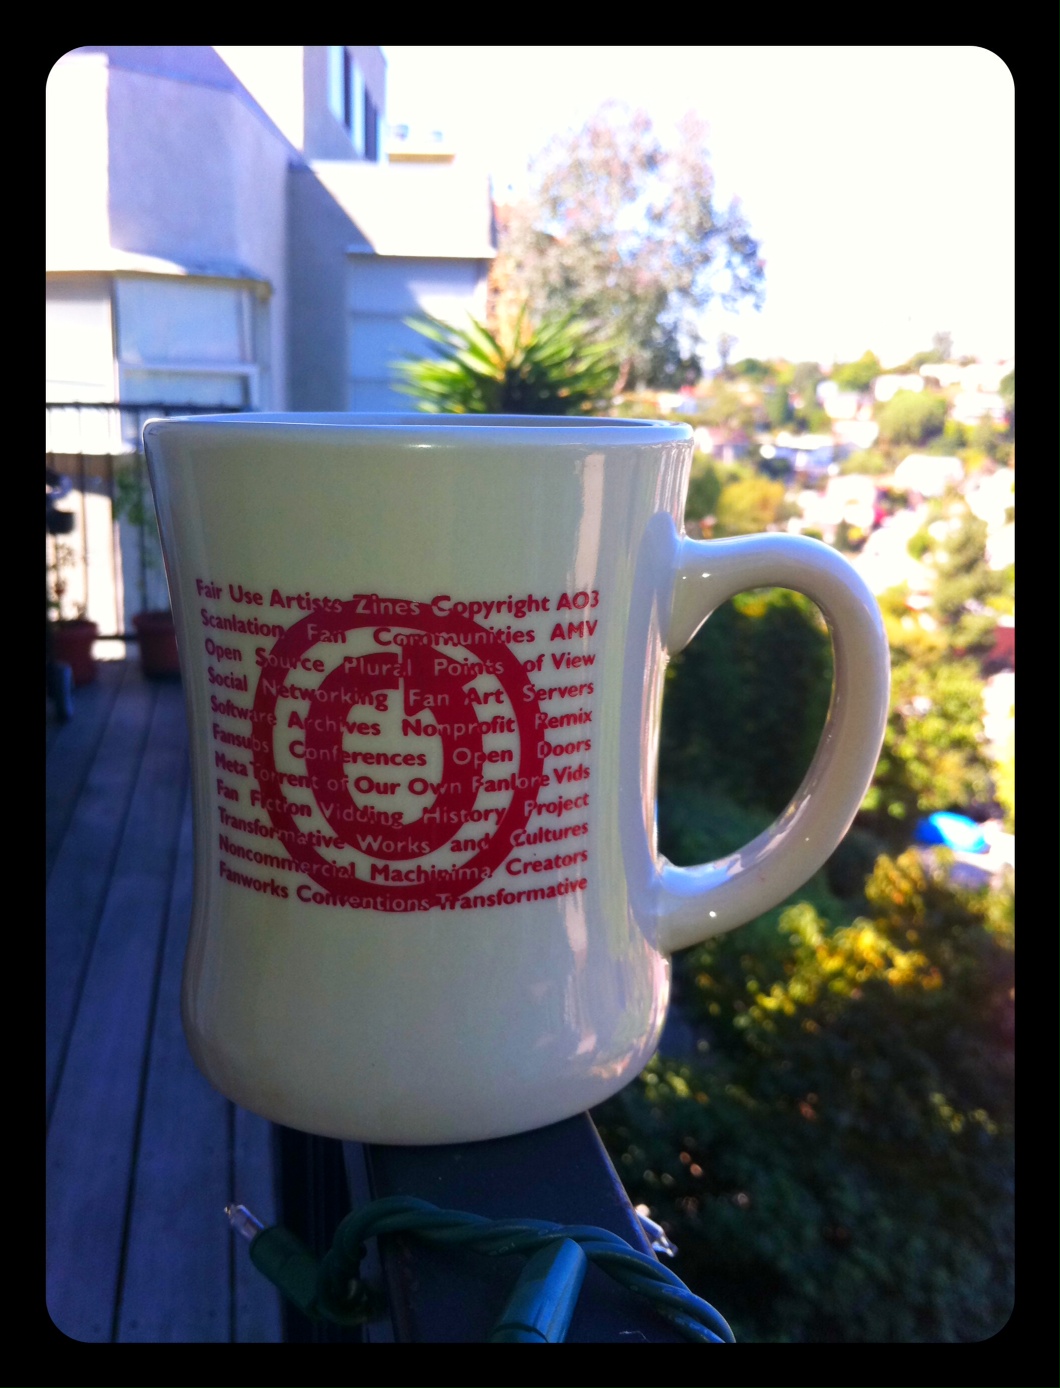 Color photo of OTW ceramic diner mug sitting in shadow on balcony railing, with sunlit trees in the background.